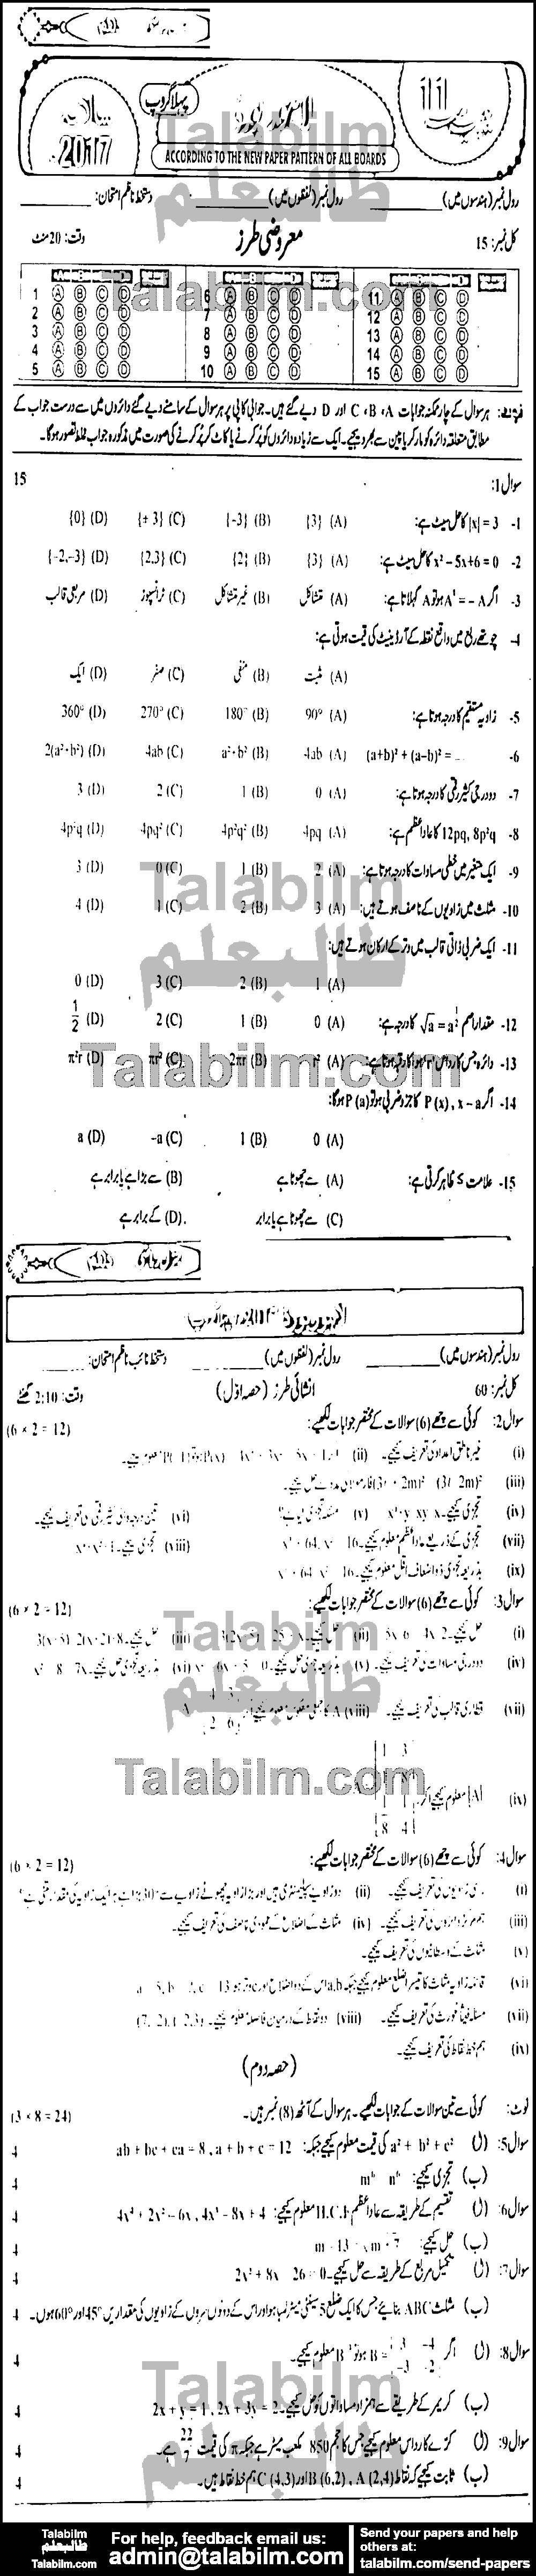 General Math 0 past paper for 2018 Group-I